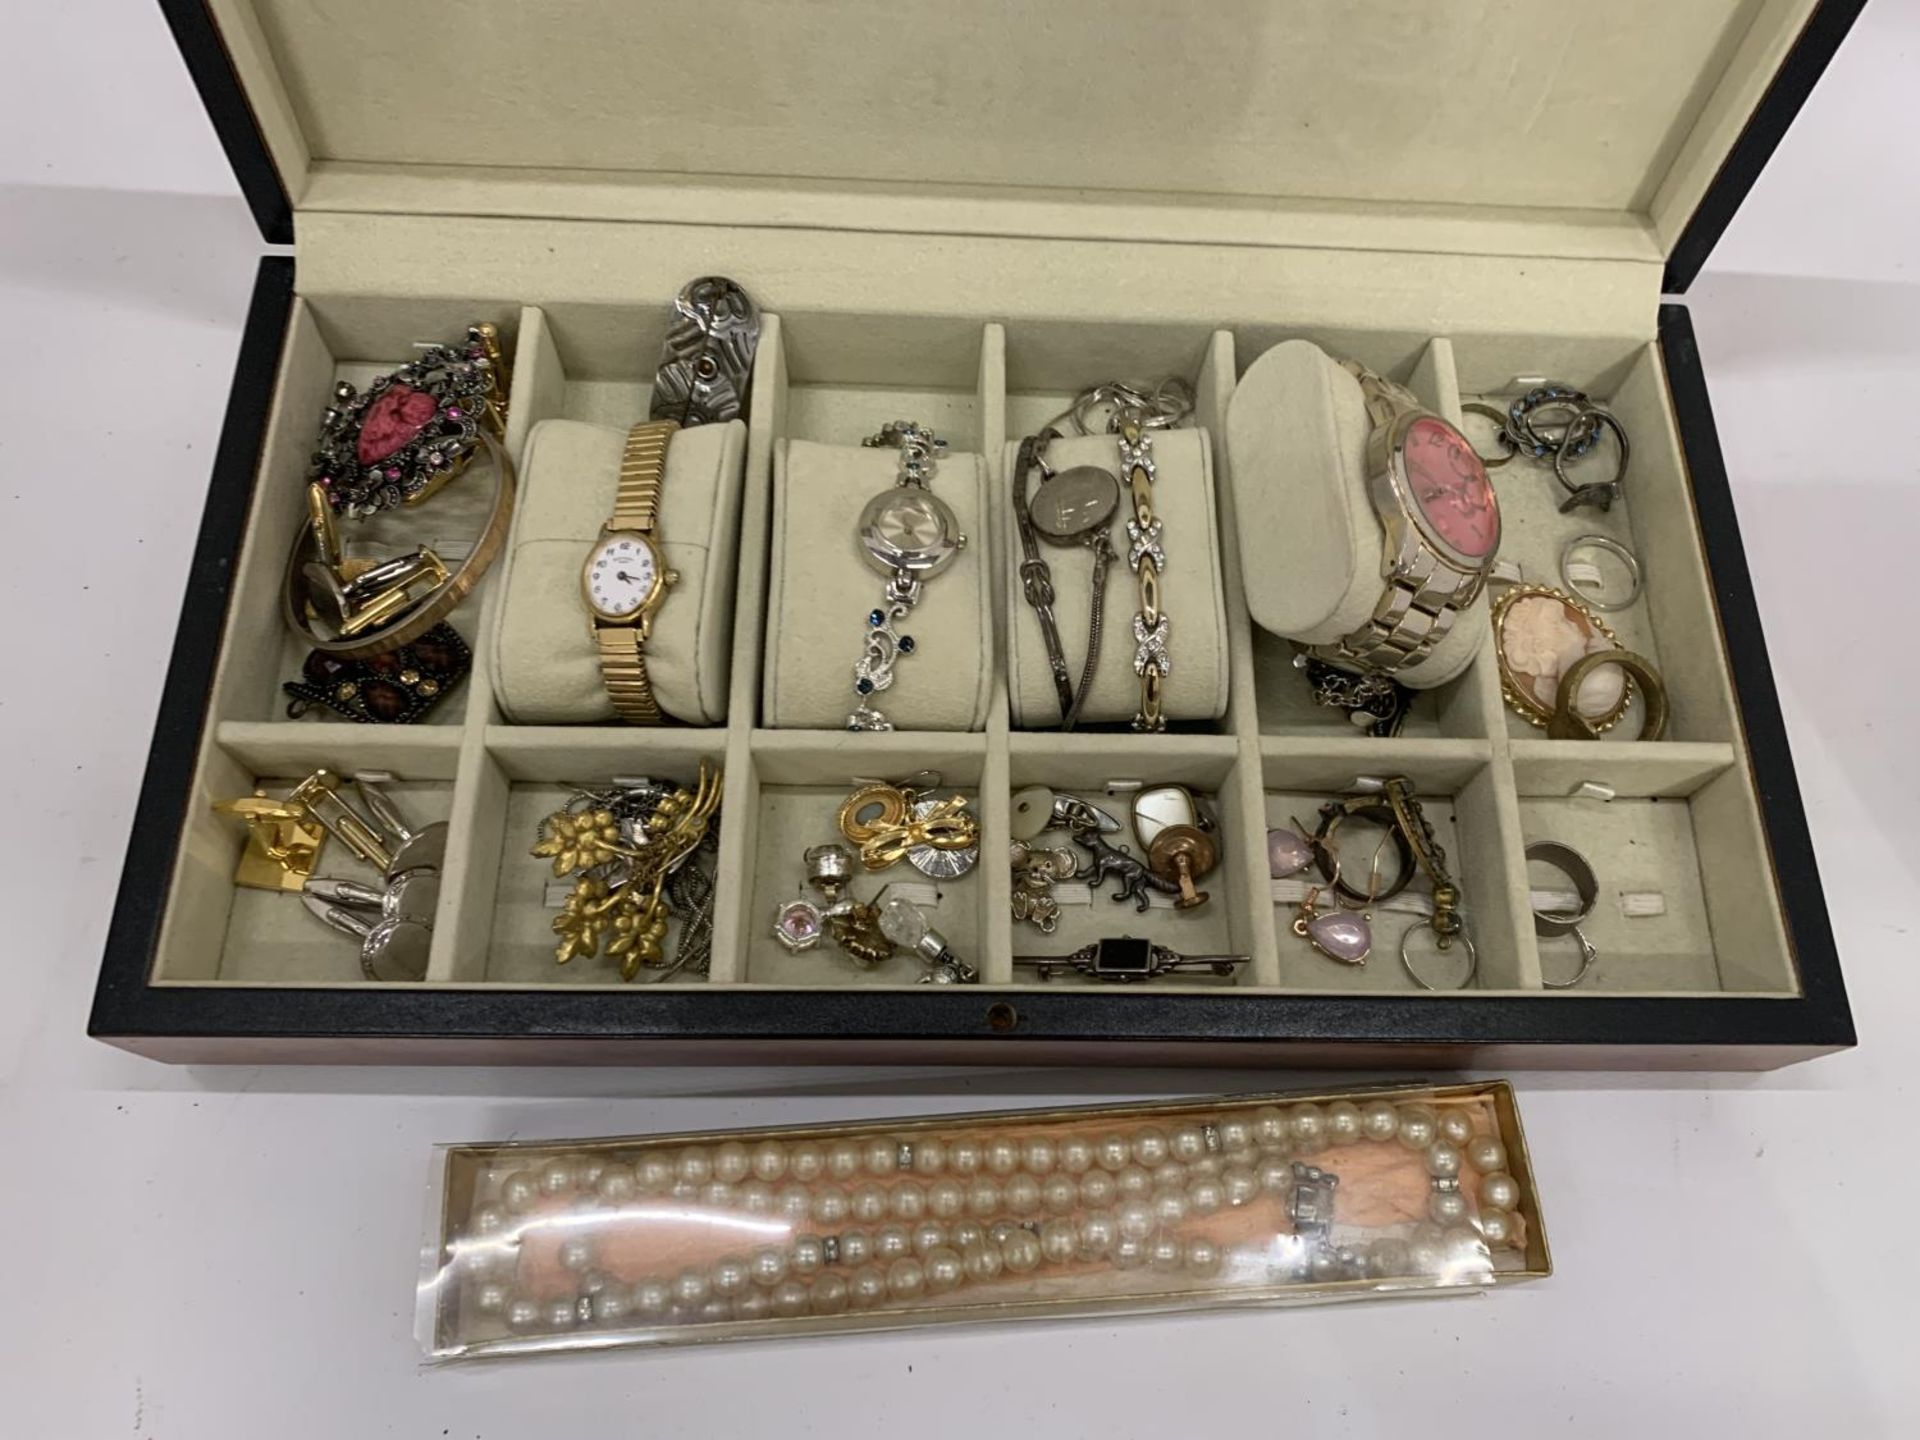 A QUANTITY OF COSTUME JEWELLERY TO INCLUDE WATCHES, BROOCHES, EARRINGS, RINGS, CUFFLINKS, ETC IN A - Image 2 of 2